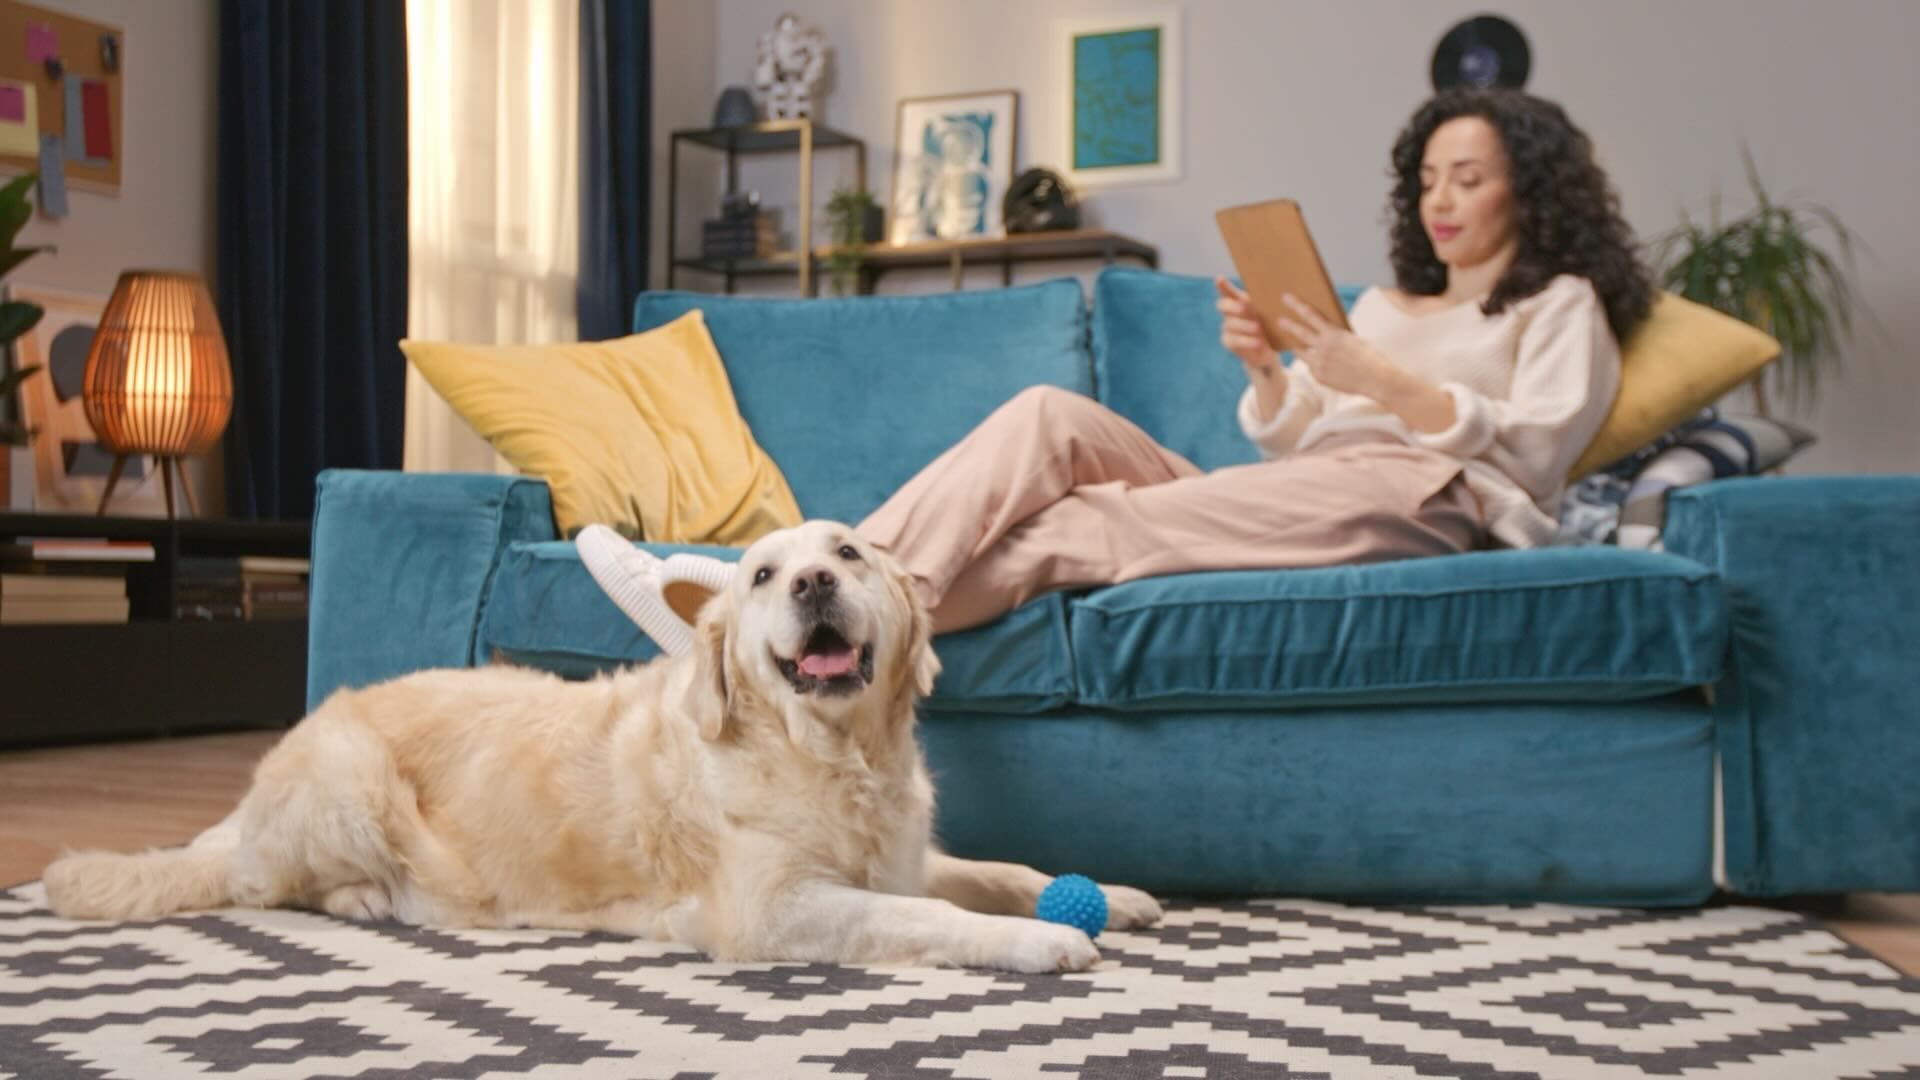 A woman sitting on her couch, using her tablet, with a dog relaxing at her feet